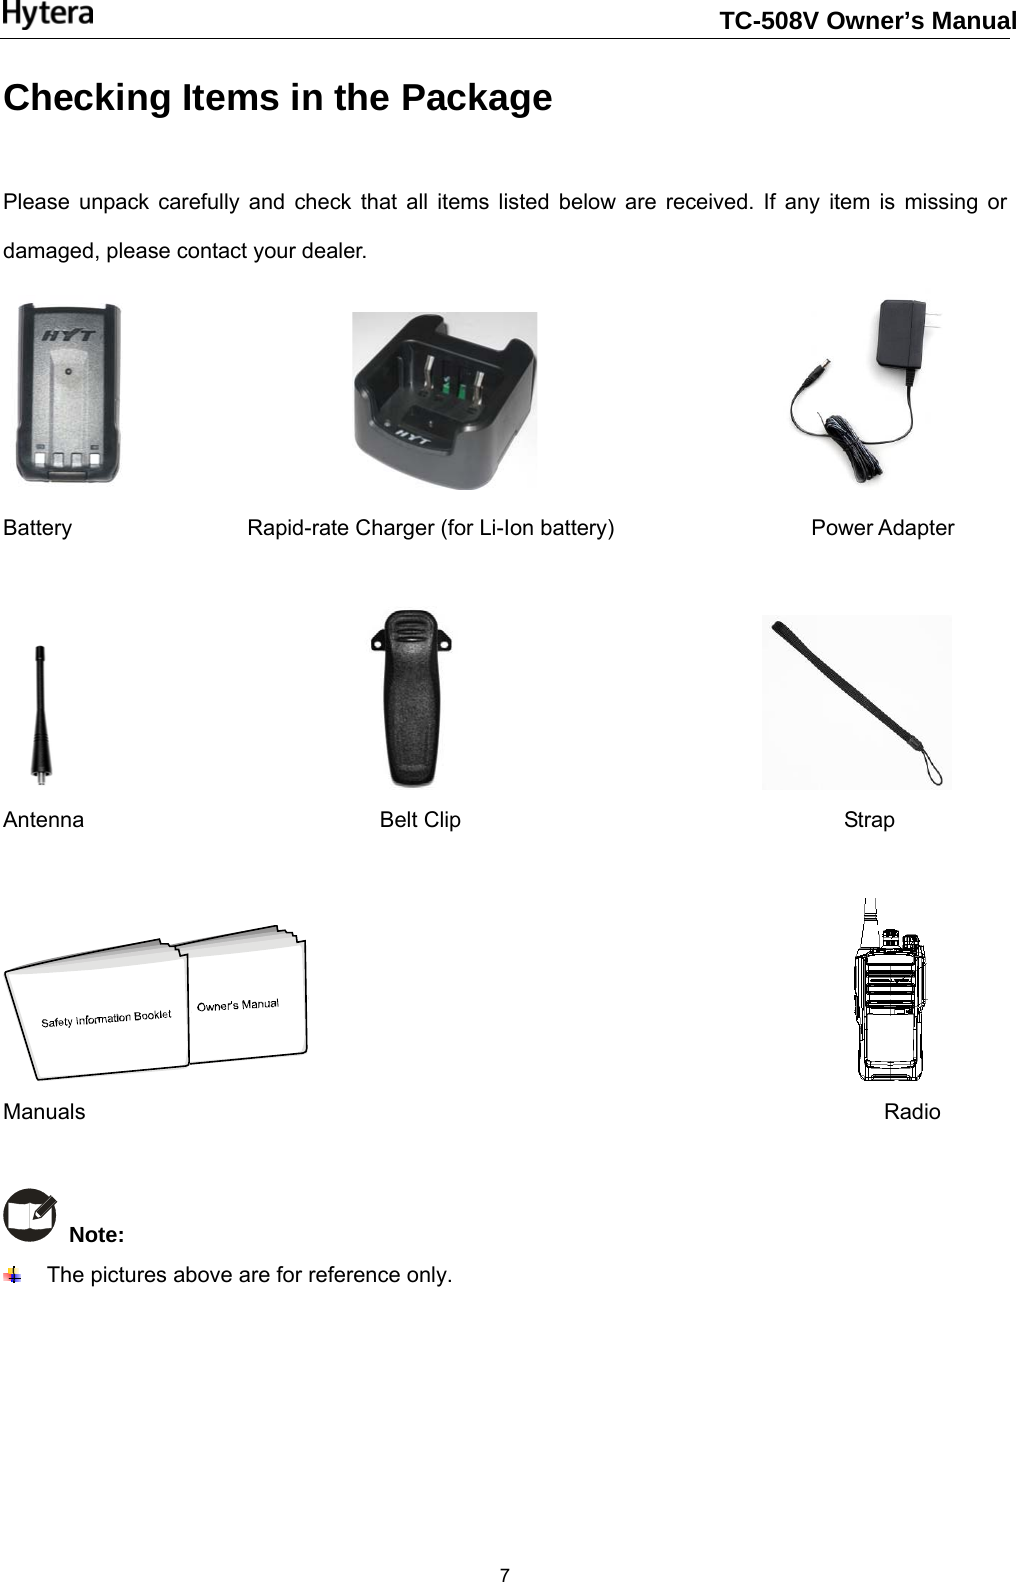                                                                       7Checking Items in the Package    Please unpack carefully and check that all items listed below are received. If any item is missing or damaged, please contact your dealer.                                                Battery                Rapid-rate Charger (for Li-Ion battery)                  Power Adapter                                                           Antenna                           Belt Clip                                   Strap                                                     Manuals                                                                         Radio    Note:    The pictures above are for reference only.     TC-508V Owner’s Manual